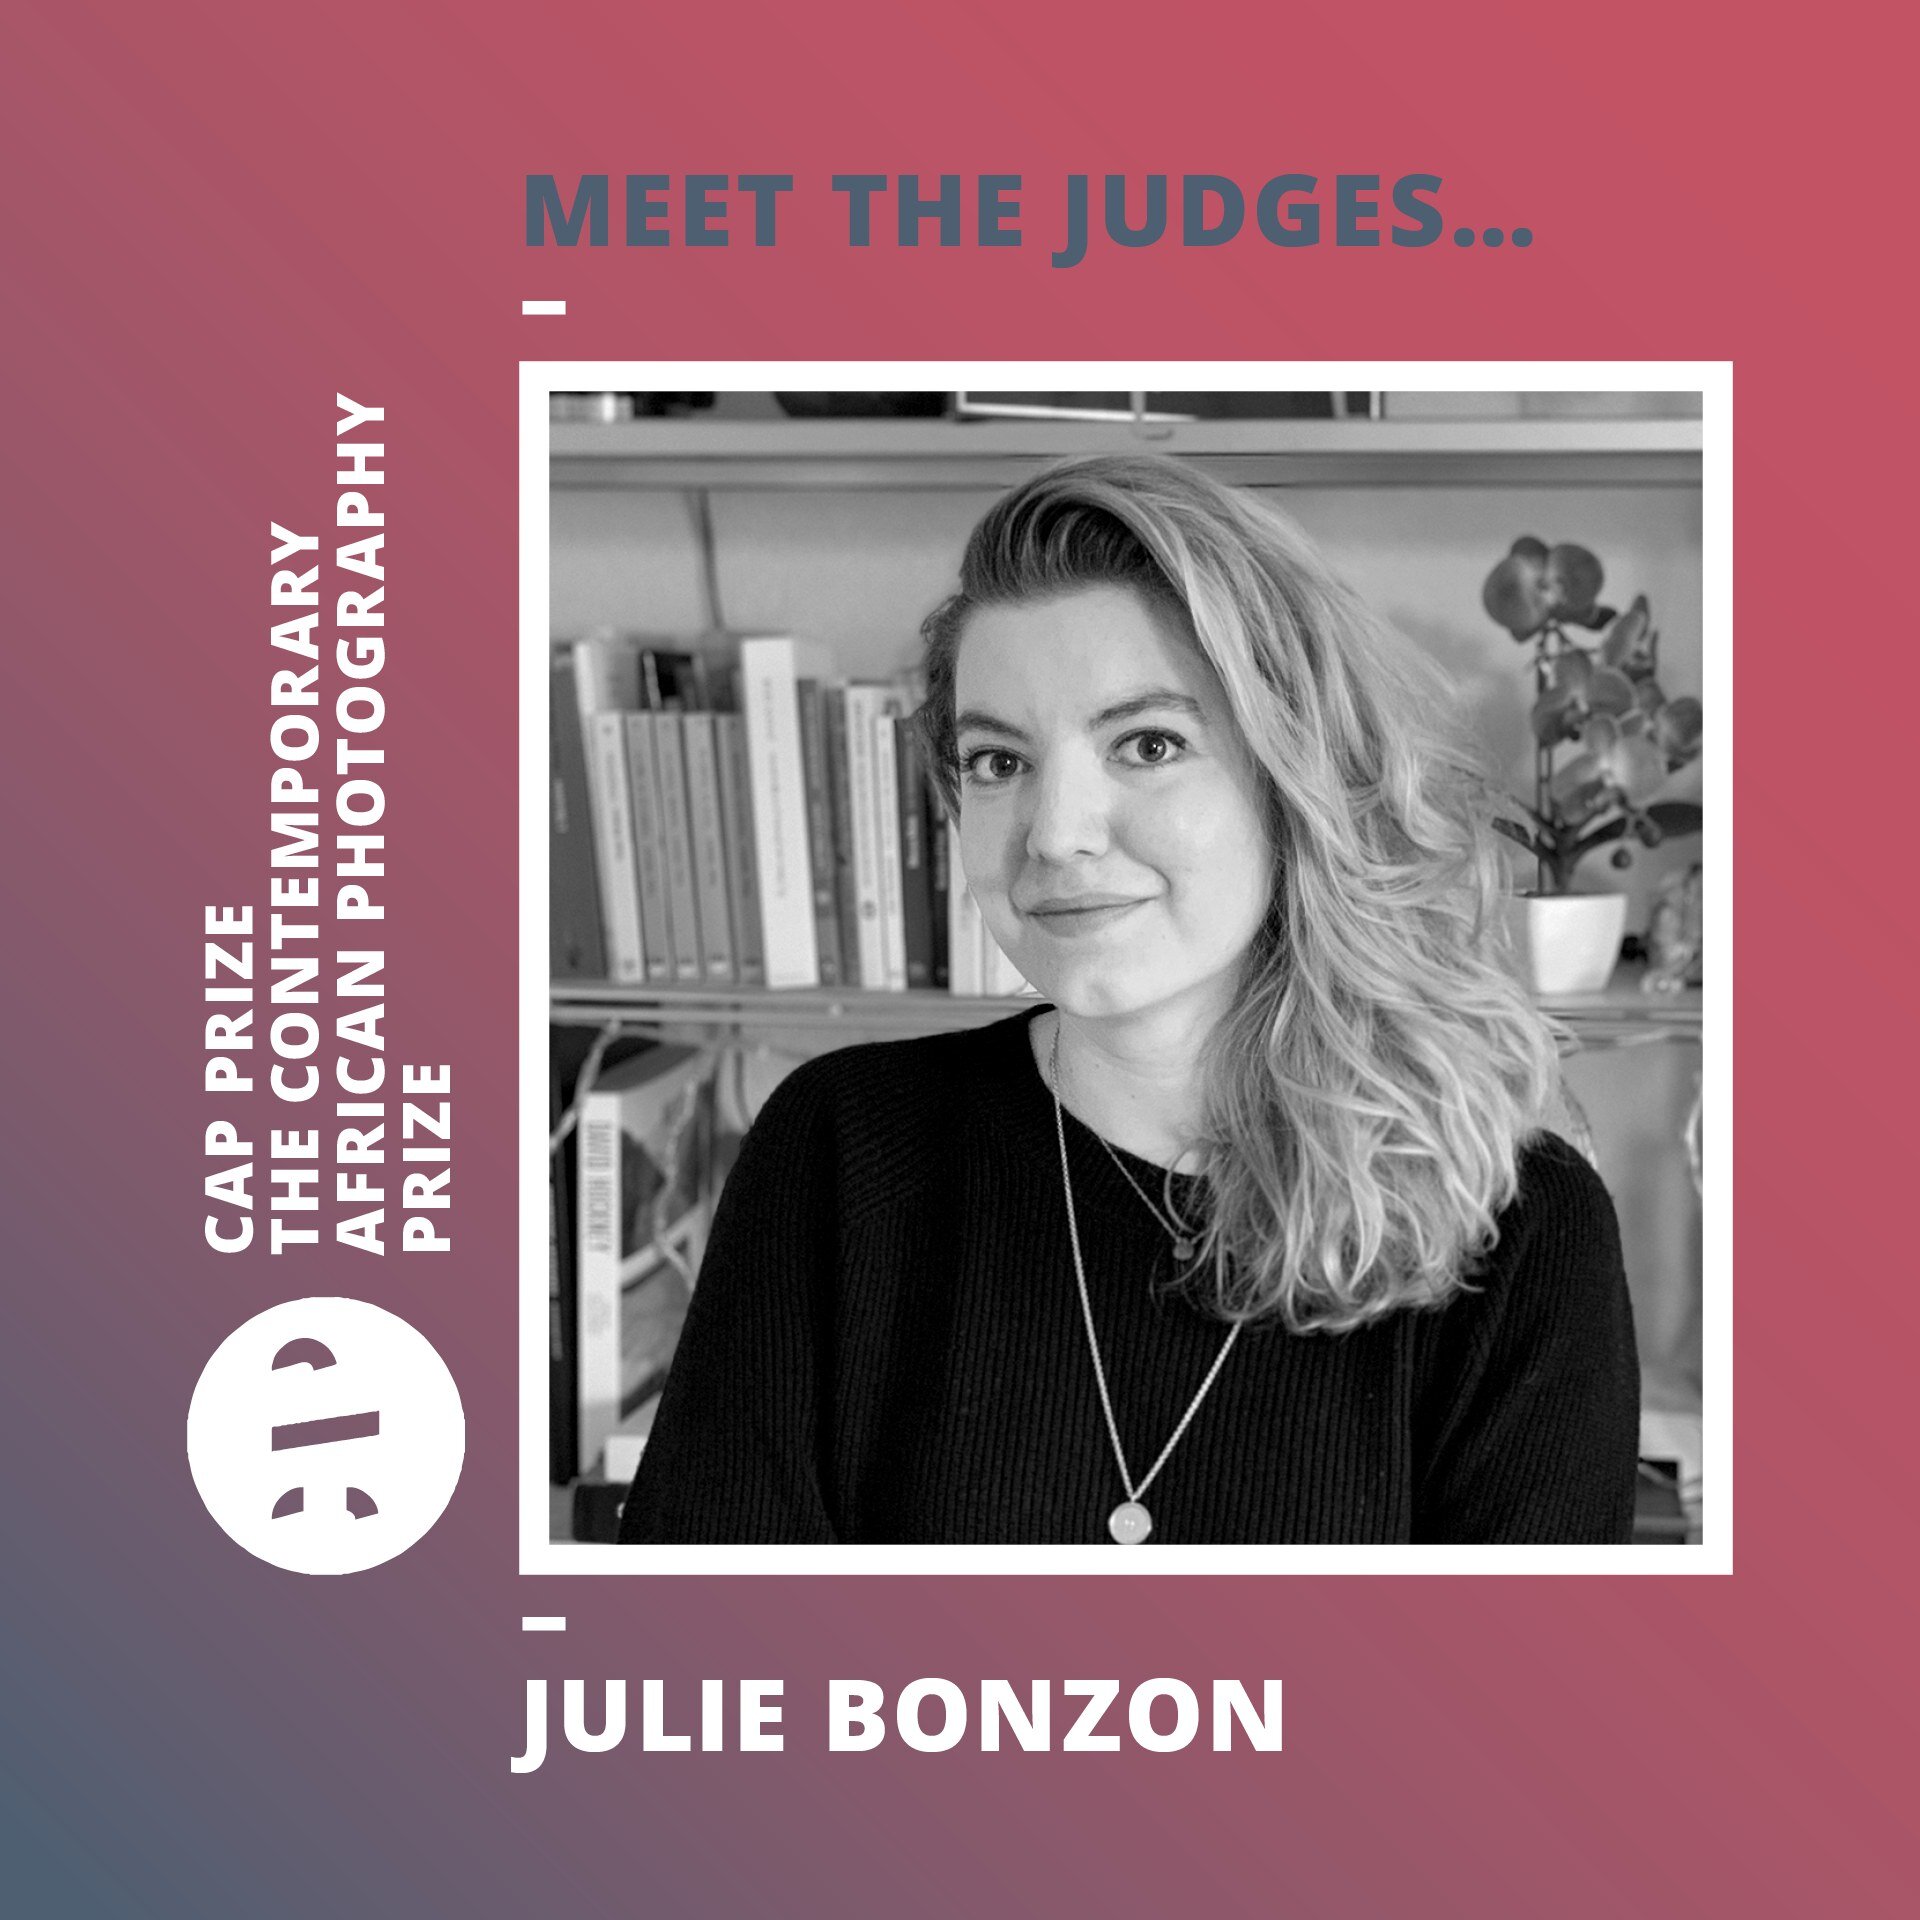 Meet the CAP Prize 2024 judges &hellip;
&ndash;
@juliebonzon10 is an art historian, photography curator and specialist in South African photography. She founded @thephotographicollective, a platform featuring lens-based artists living and working in 